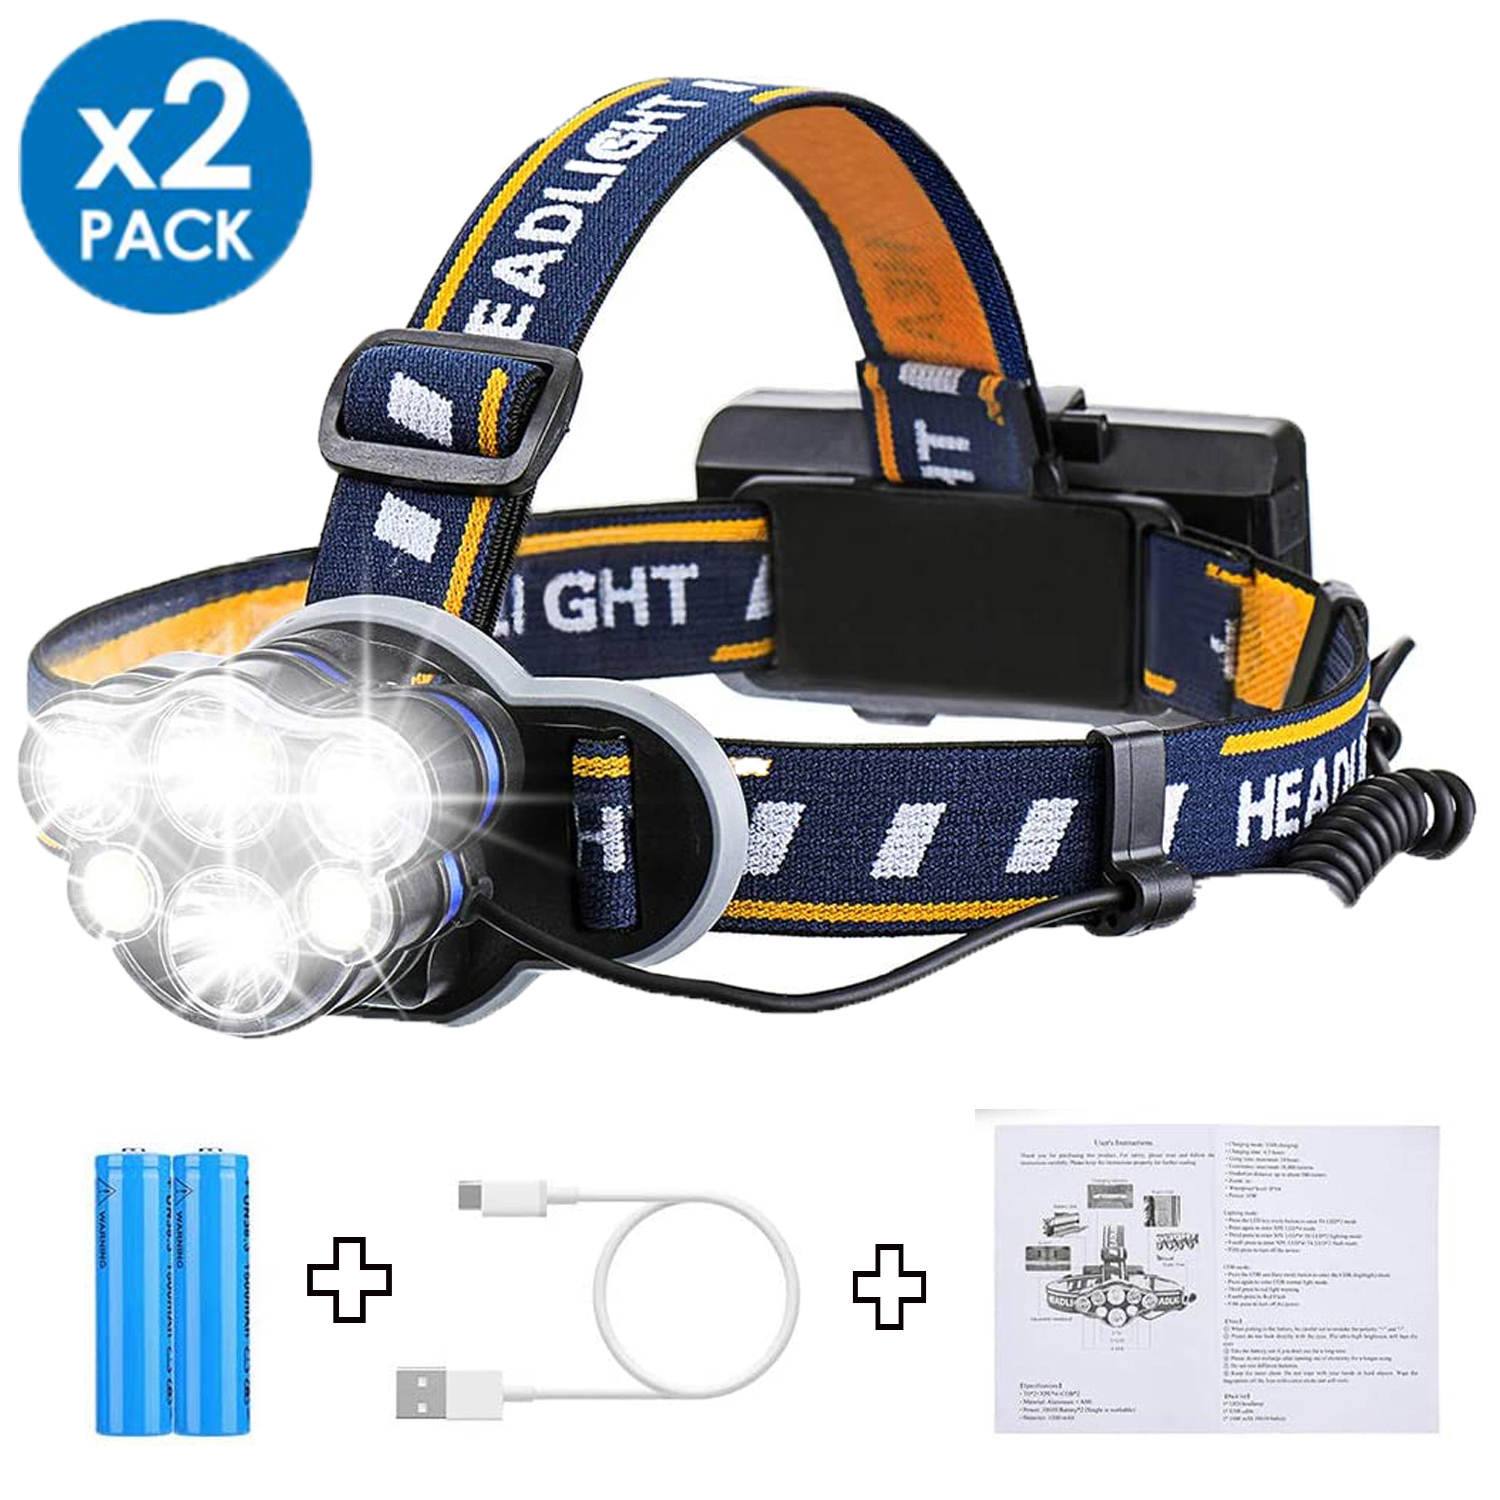 Details about  / COB LED Headlamp Headlight 8 Mode Lighting Rechargeable Head Lamp Hand Free